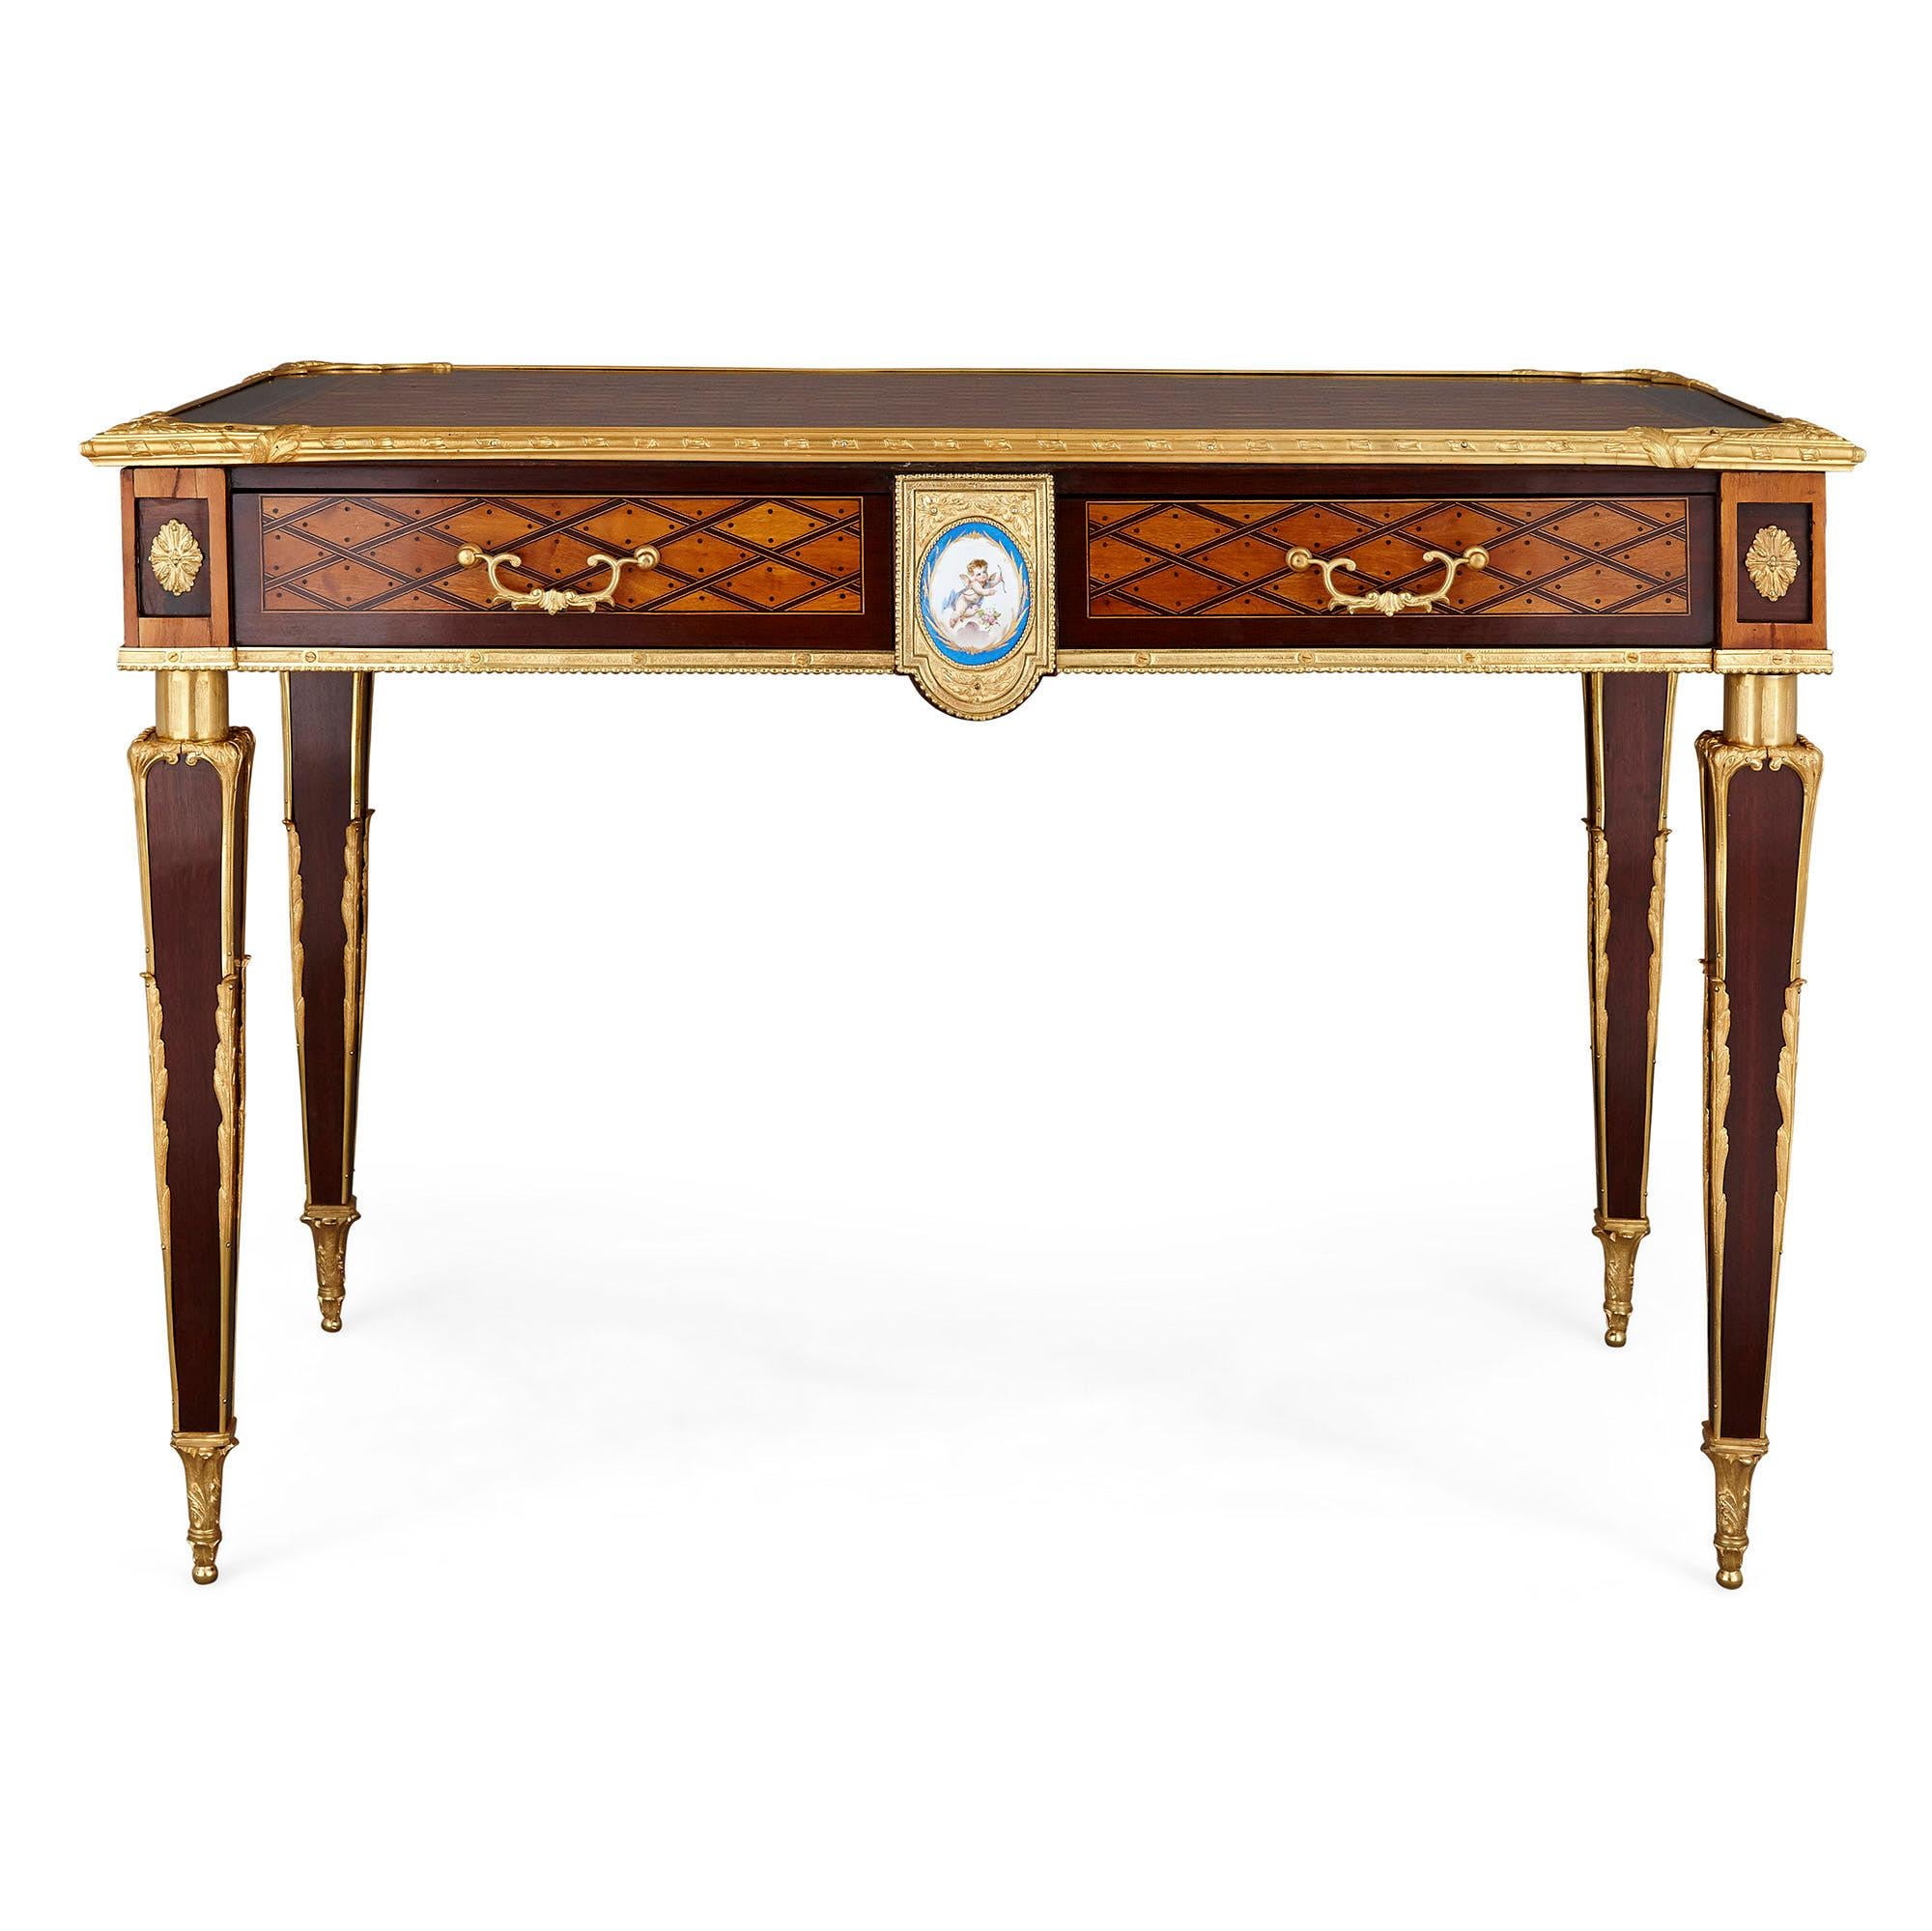 Antique English Victorian marquetry writing desk by Donald Ross
English, c. 1890
Measures: Height 75cm, width 108cm, depth 64cm

This superb mahogany writing desk by Donald Ross features Ross’ distinctive “trellis and dot” marquetry of satinwood